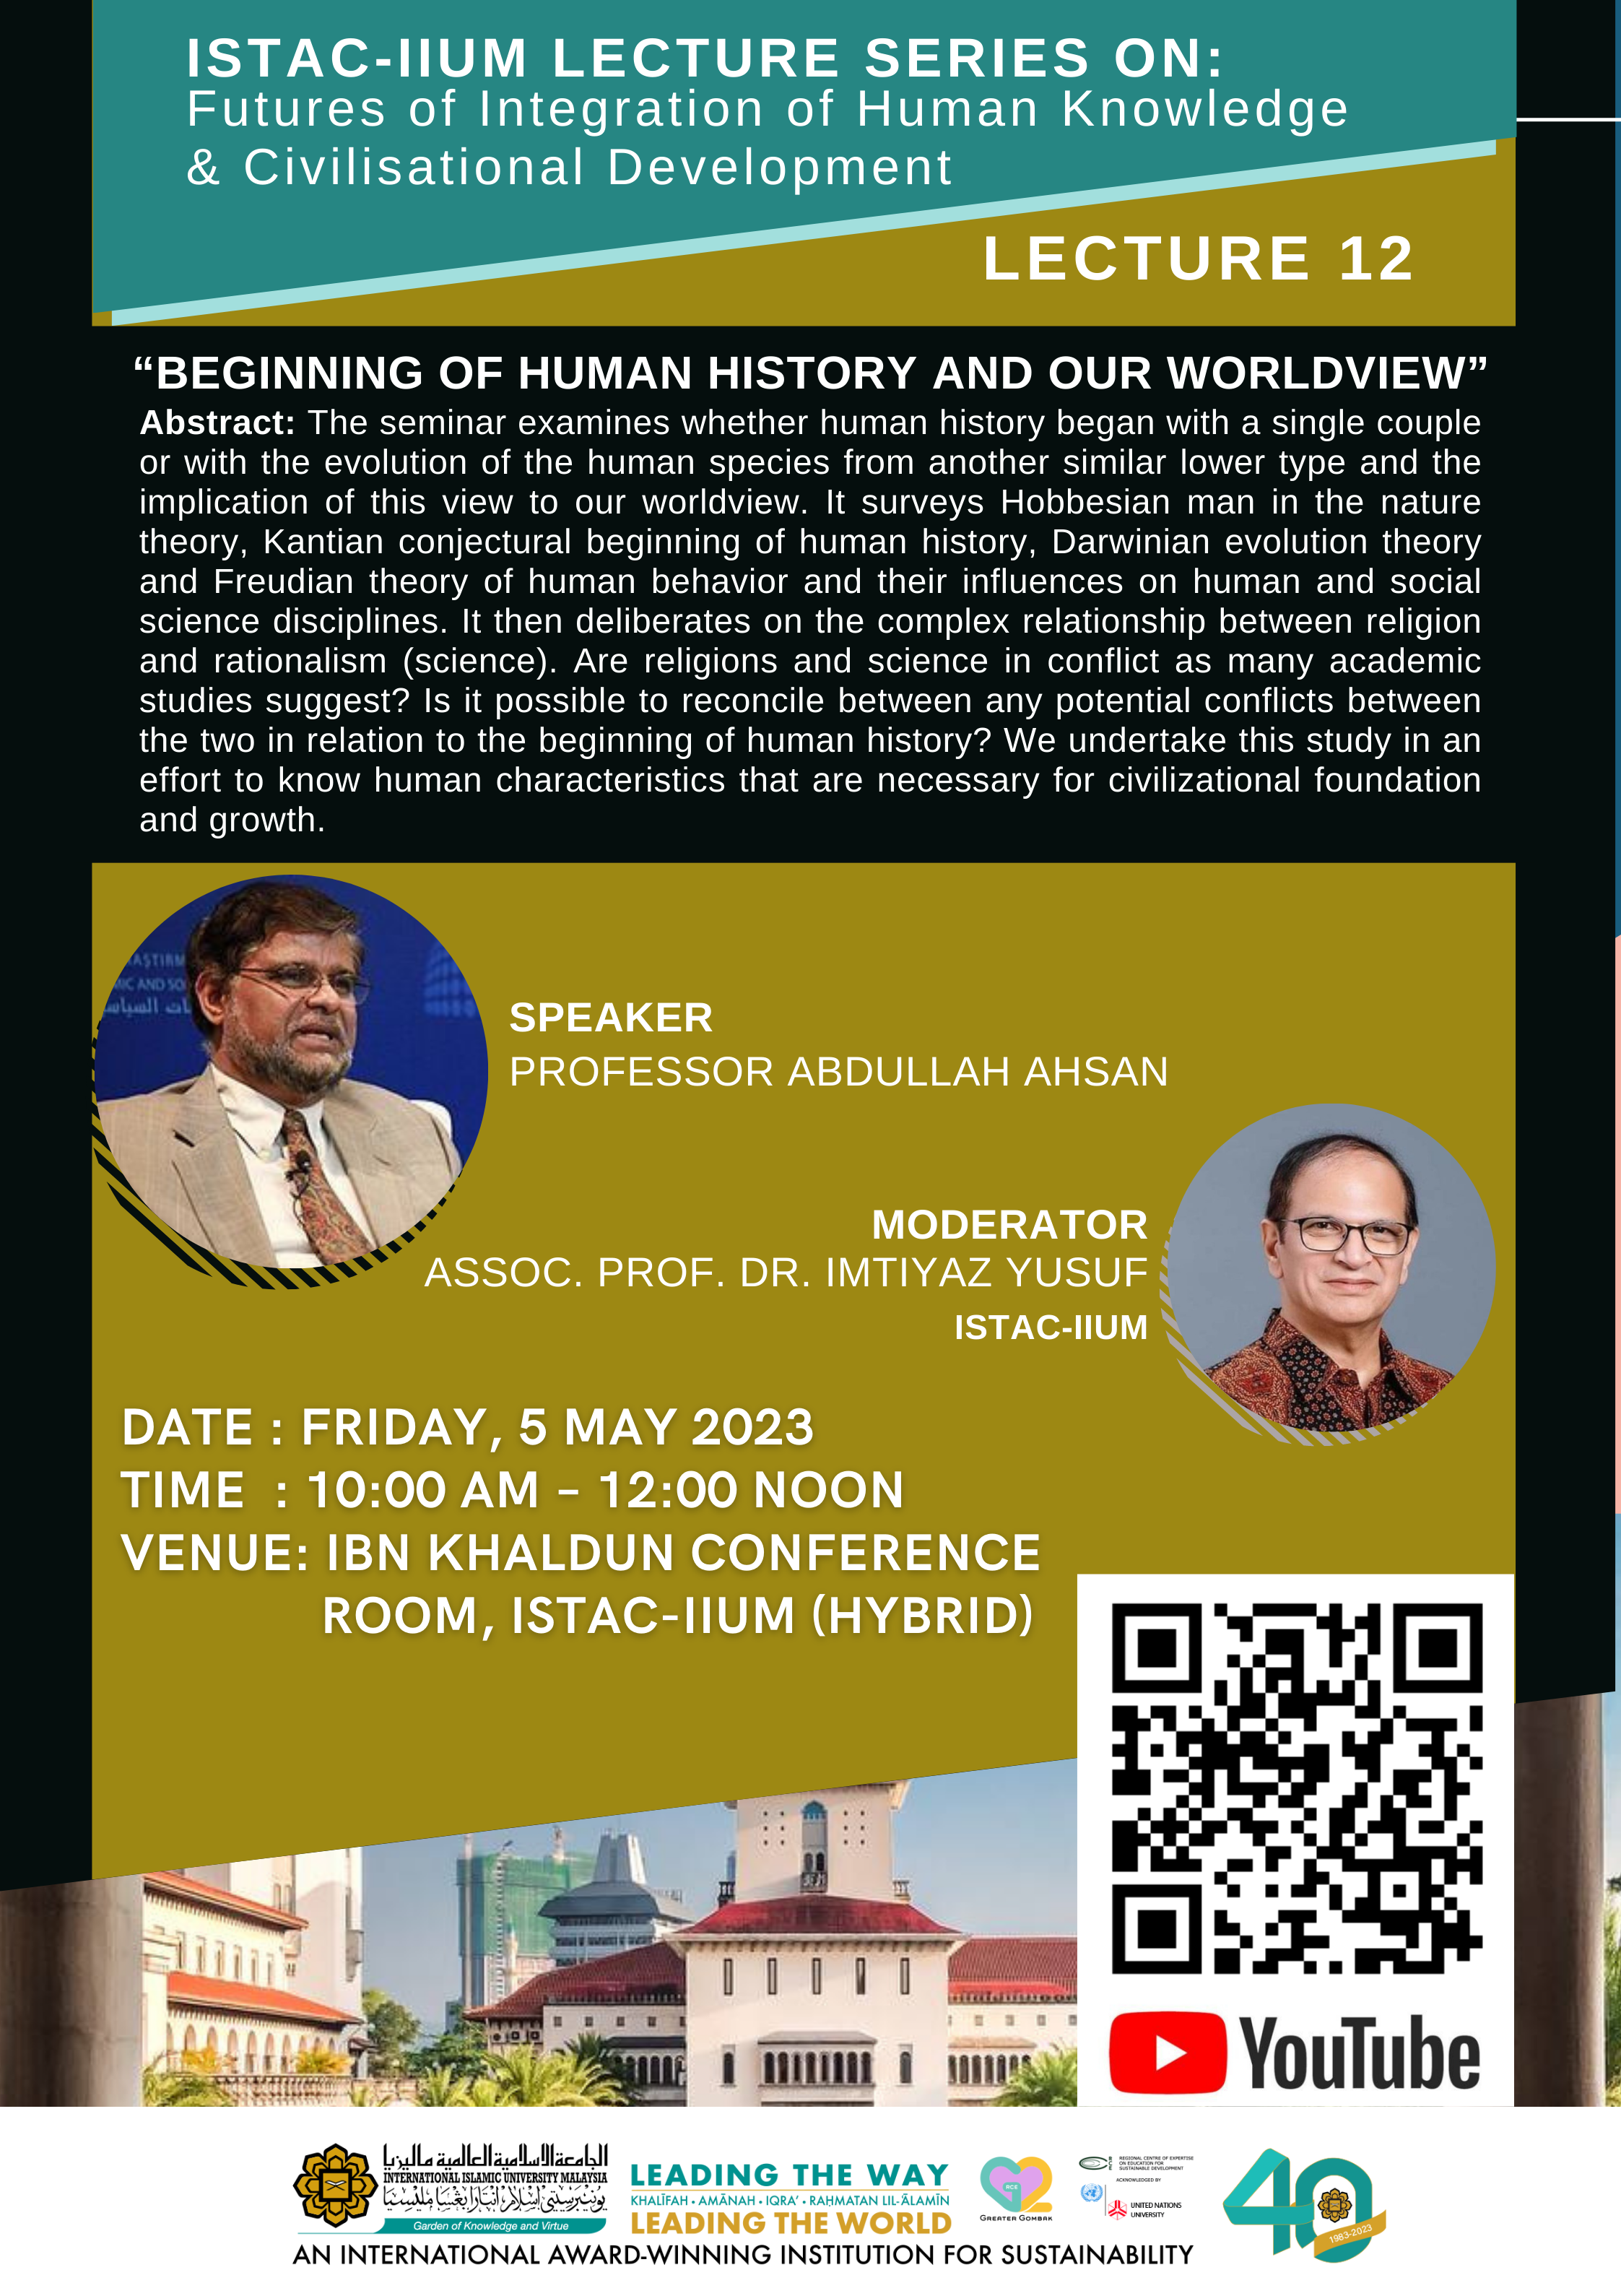 ISTAC-IIUM LECTURE SERIES ON FUTURES OF INTEGRATION OF HUMAN KNOWLEDGE & CIVILISATIONAL DEVELOPMENT_LECTURE 12